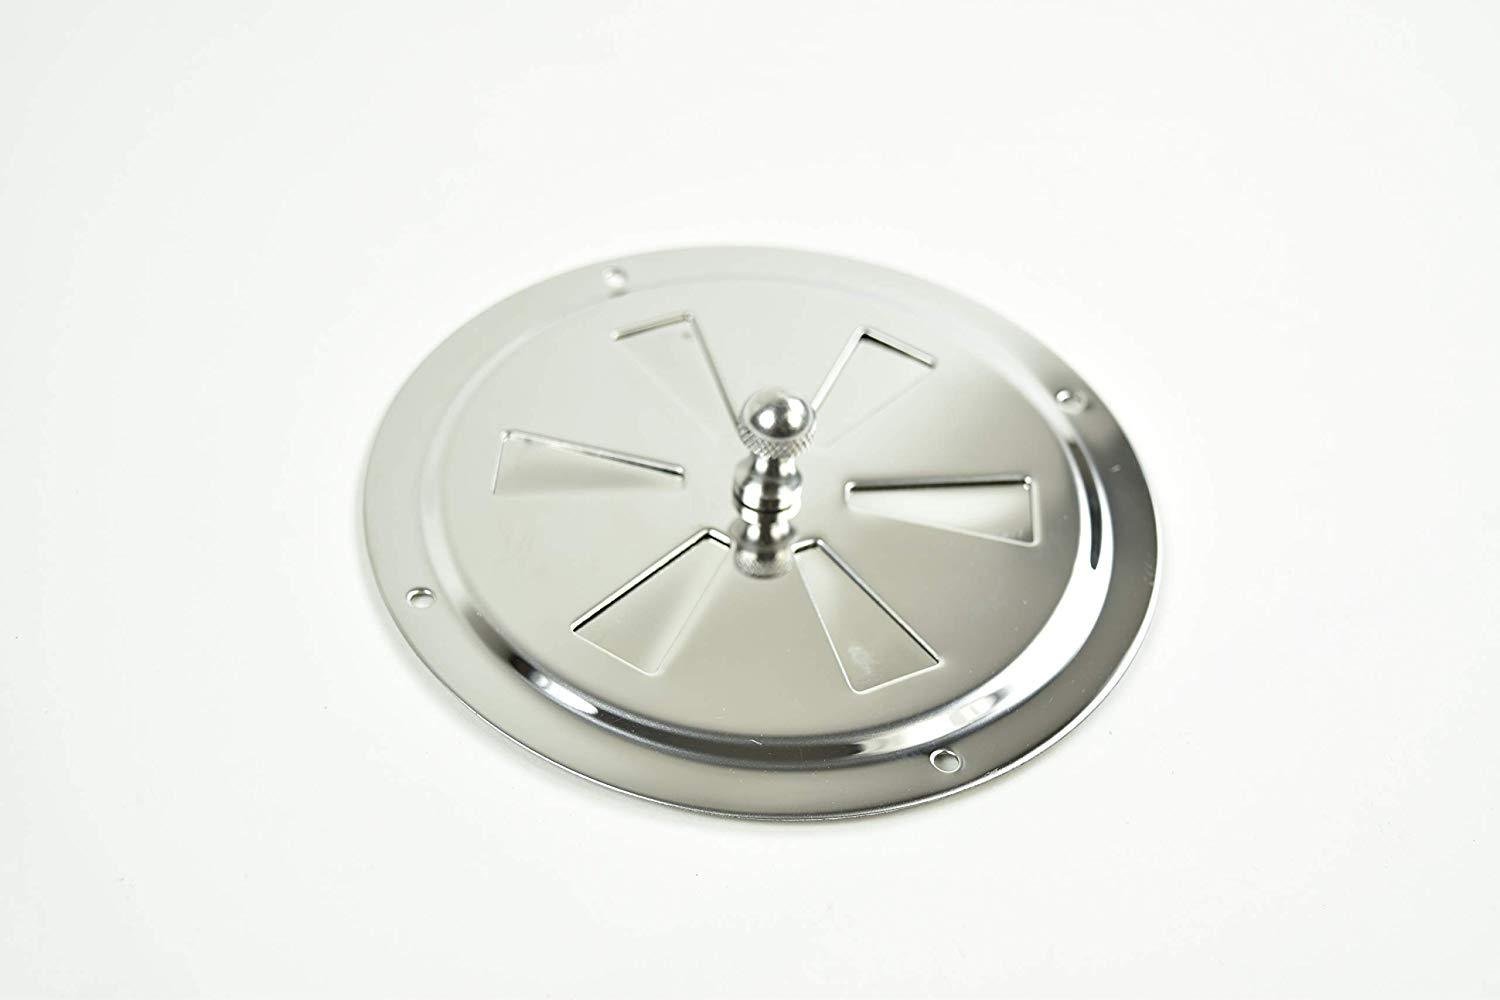 Marine City Stainless-Steel 4” / 5" Center Knob Butterfly Vent (Diameter:4 inch)